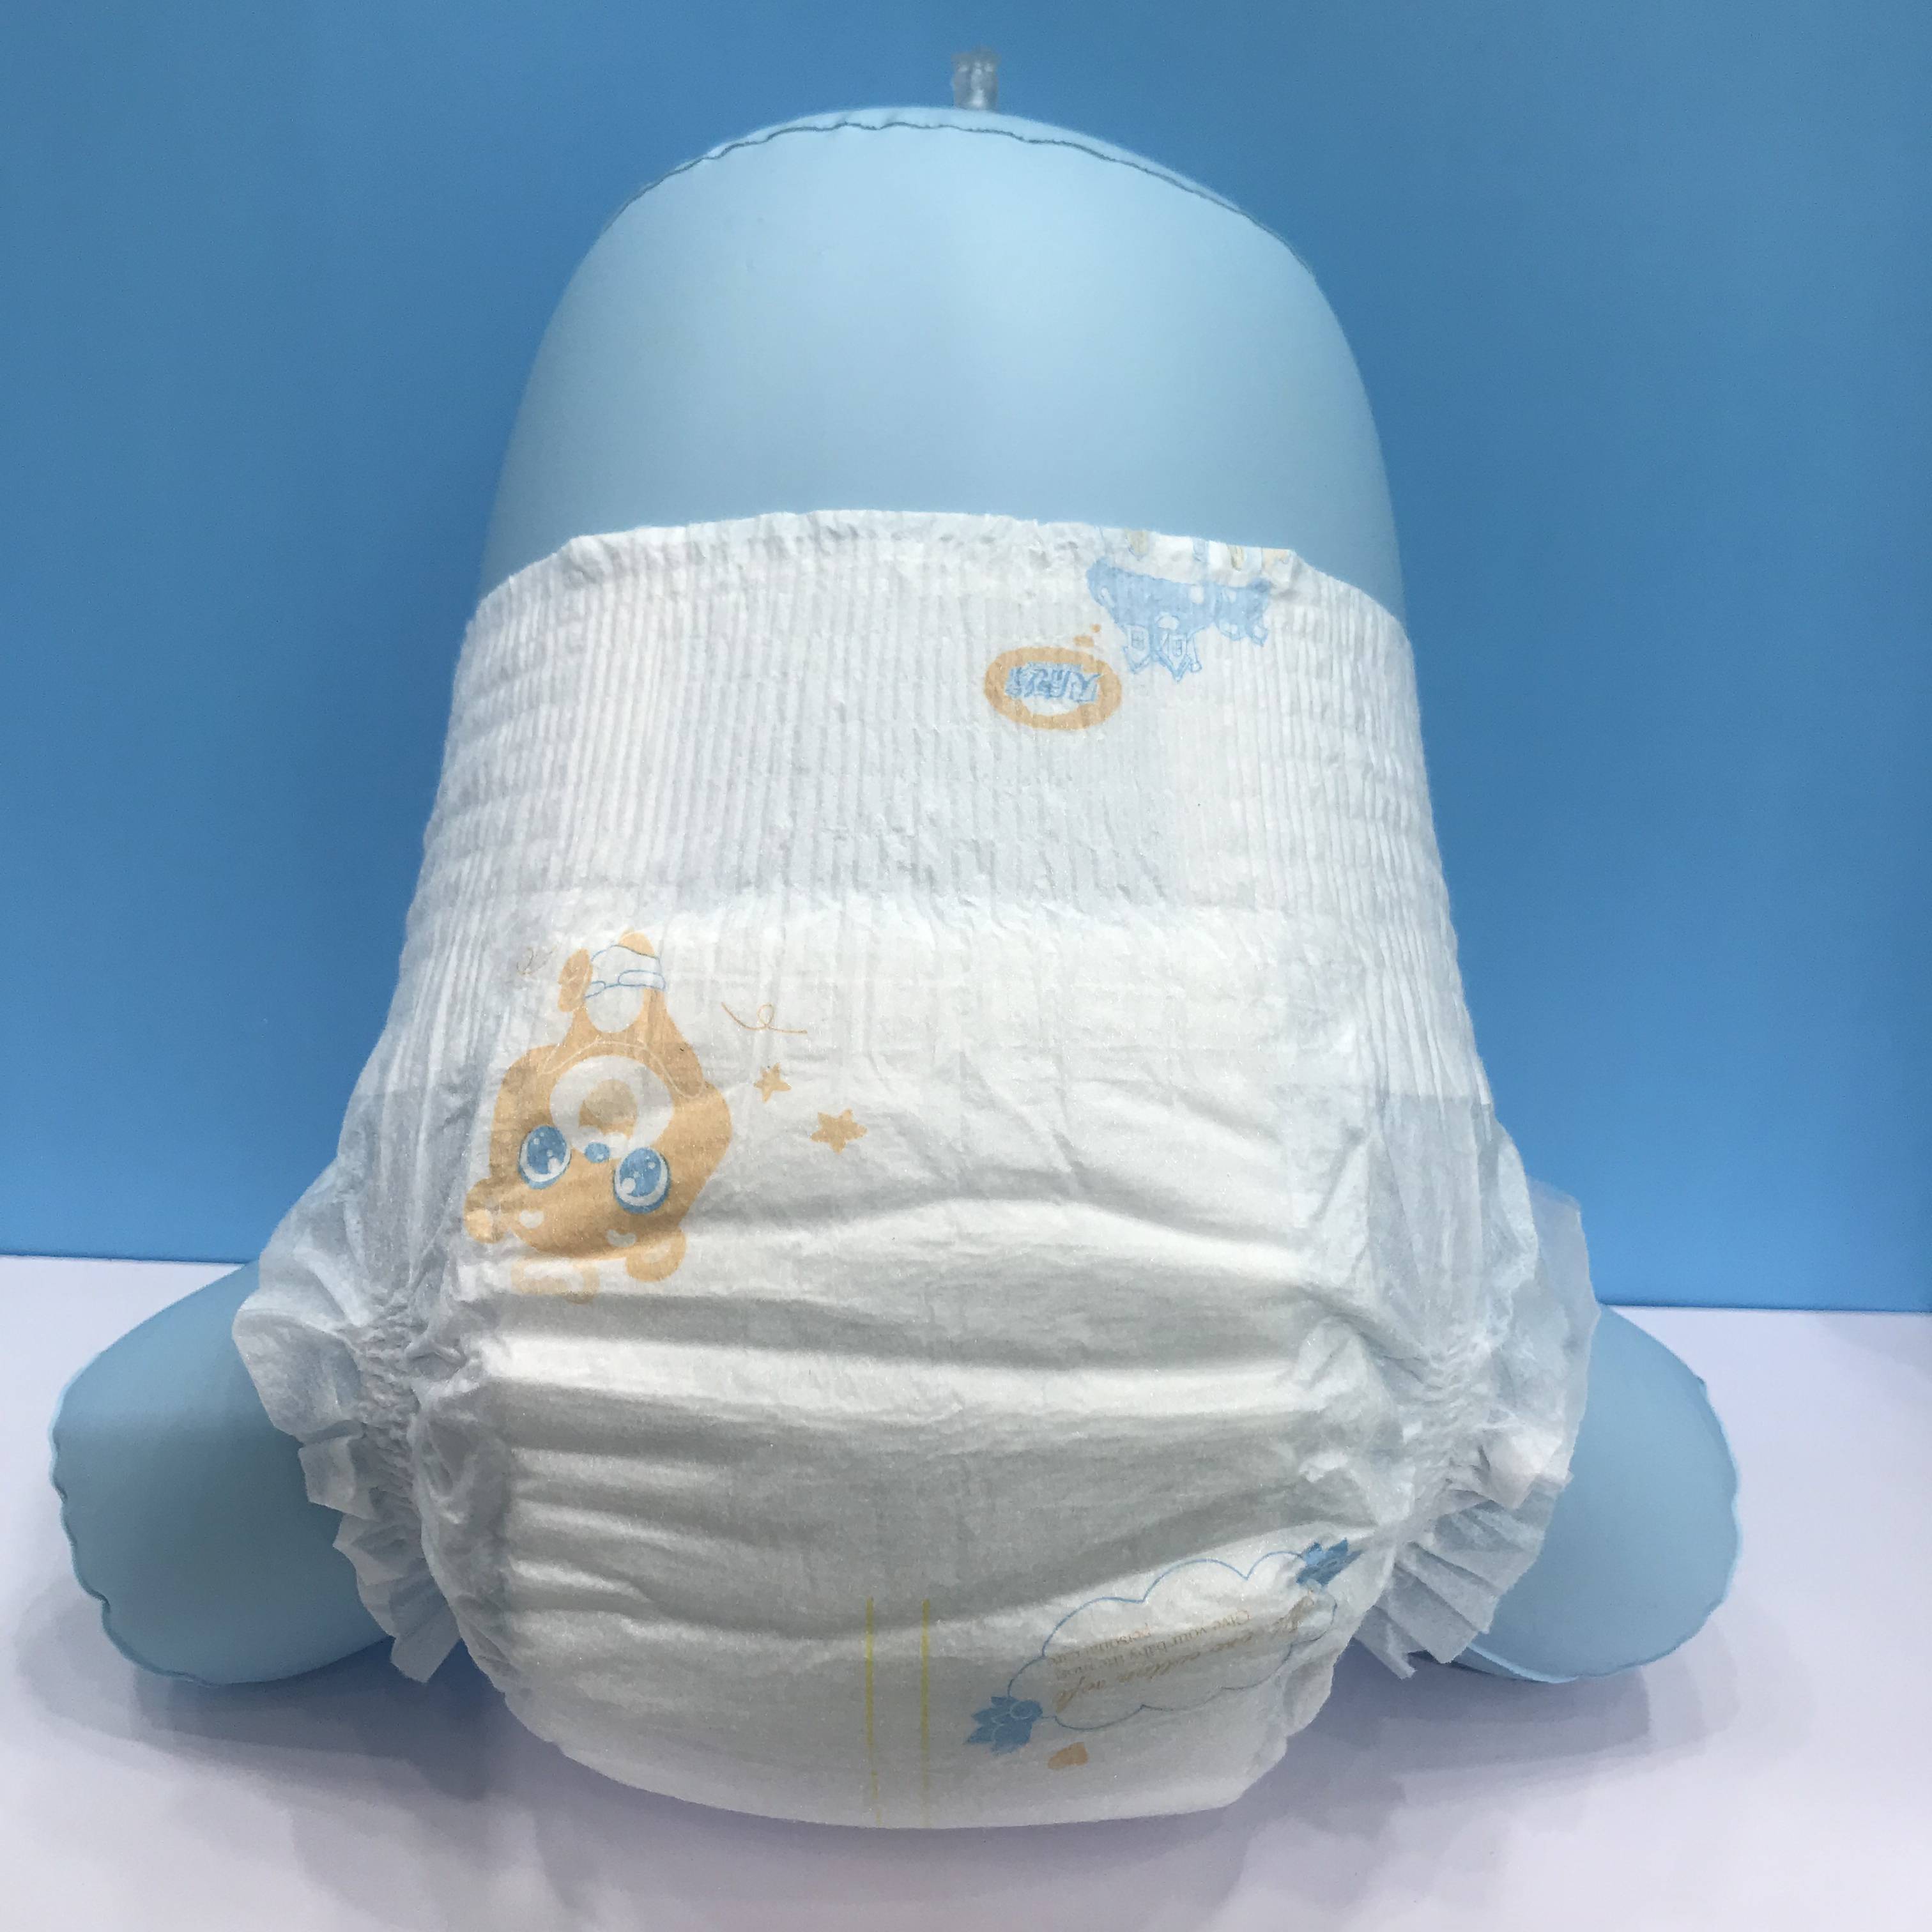 Best Selling Products Low Price Baby Diaper Manufacturer